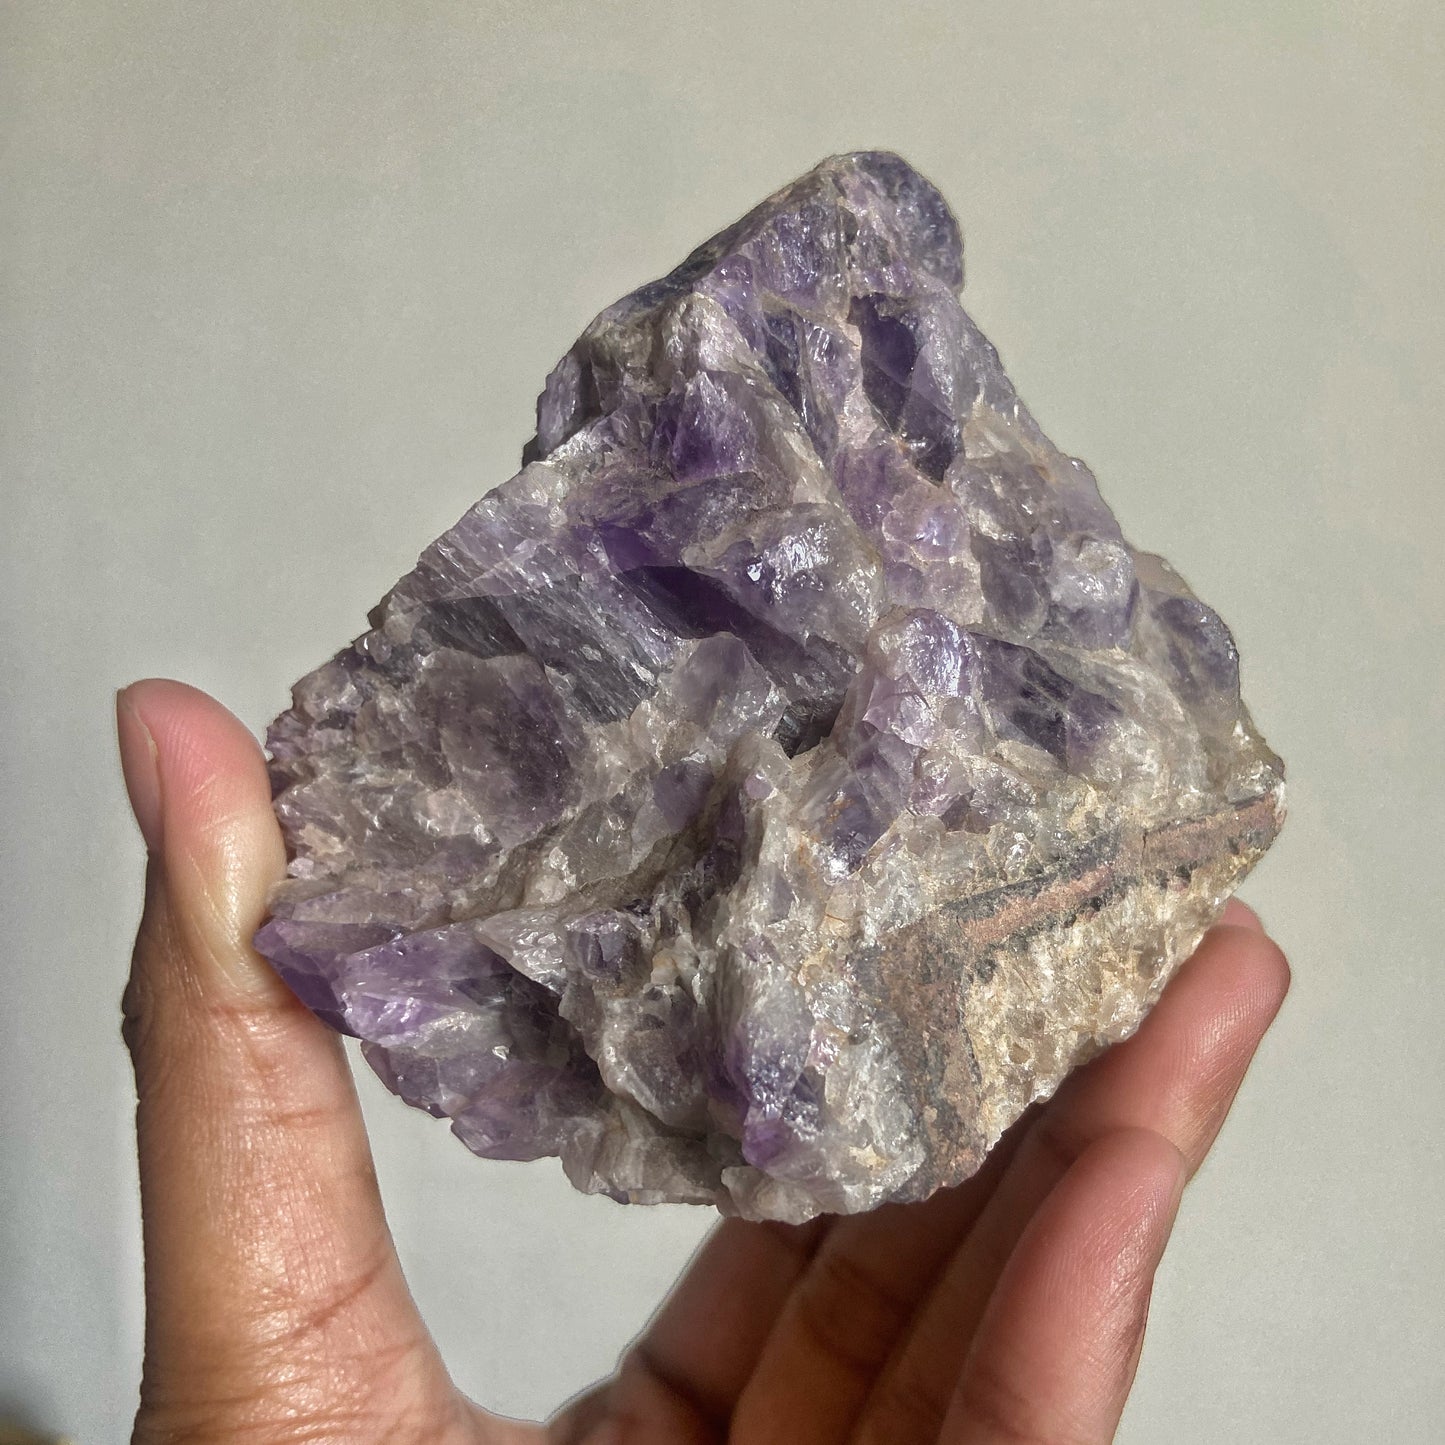 Amethyst Raw Stone - 380 Gm | Helps activating Third Eye & Psychic abilities